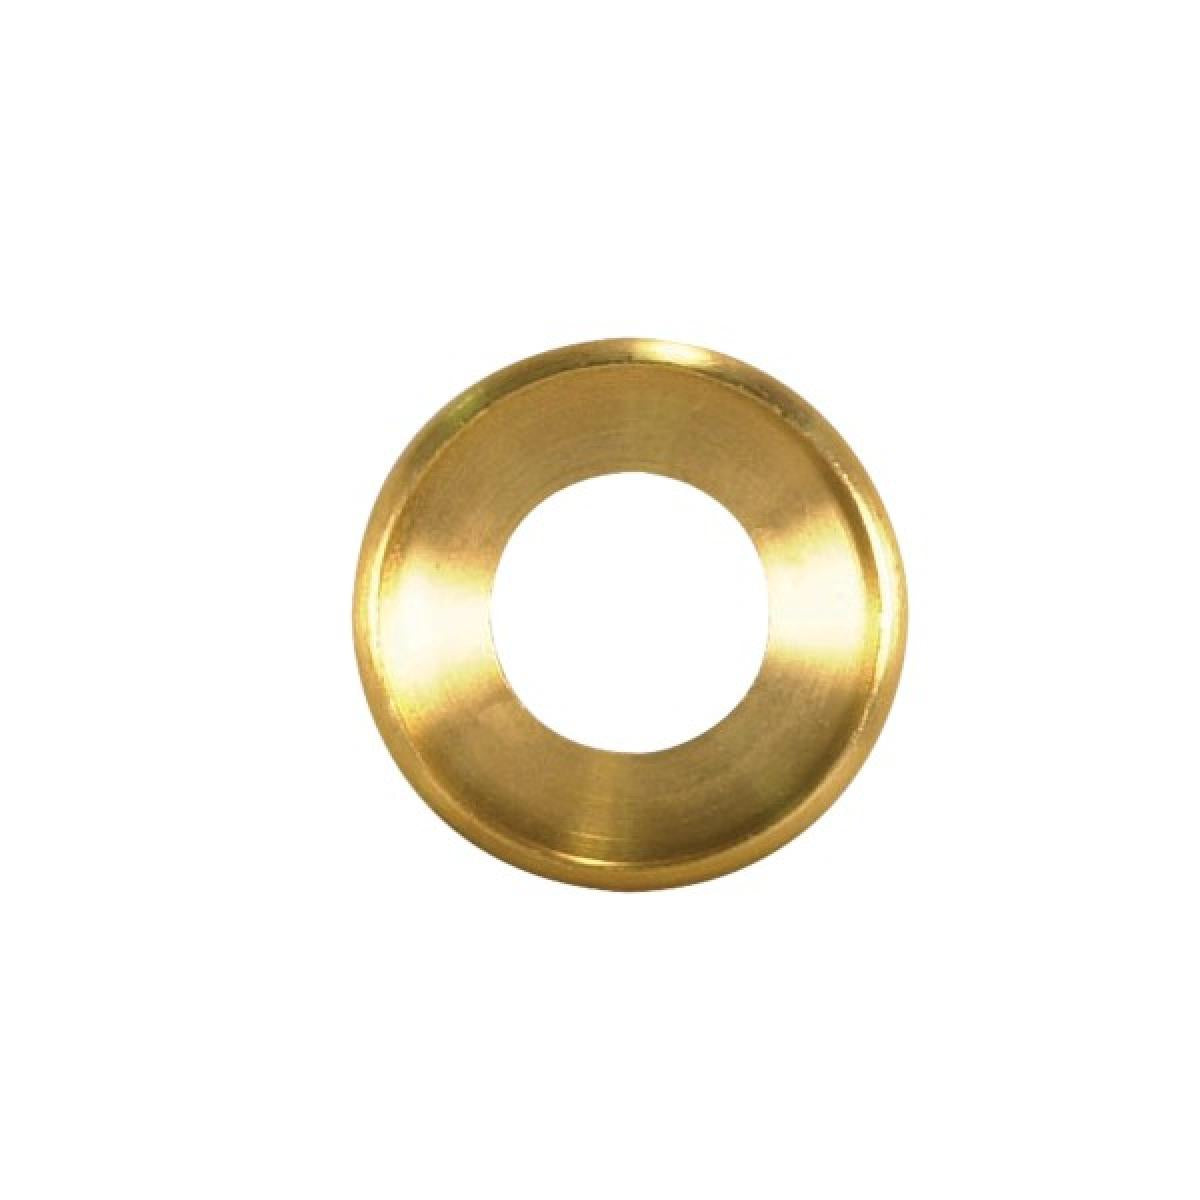 Satco 90-1618 Turned Brass Check Ring 1/4 IP Slip Unfinished 1-3/4" Diameter